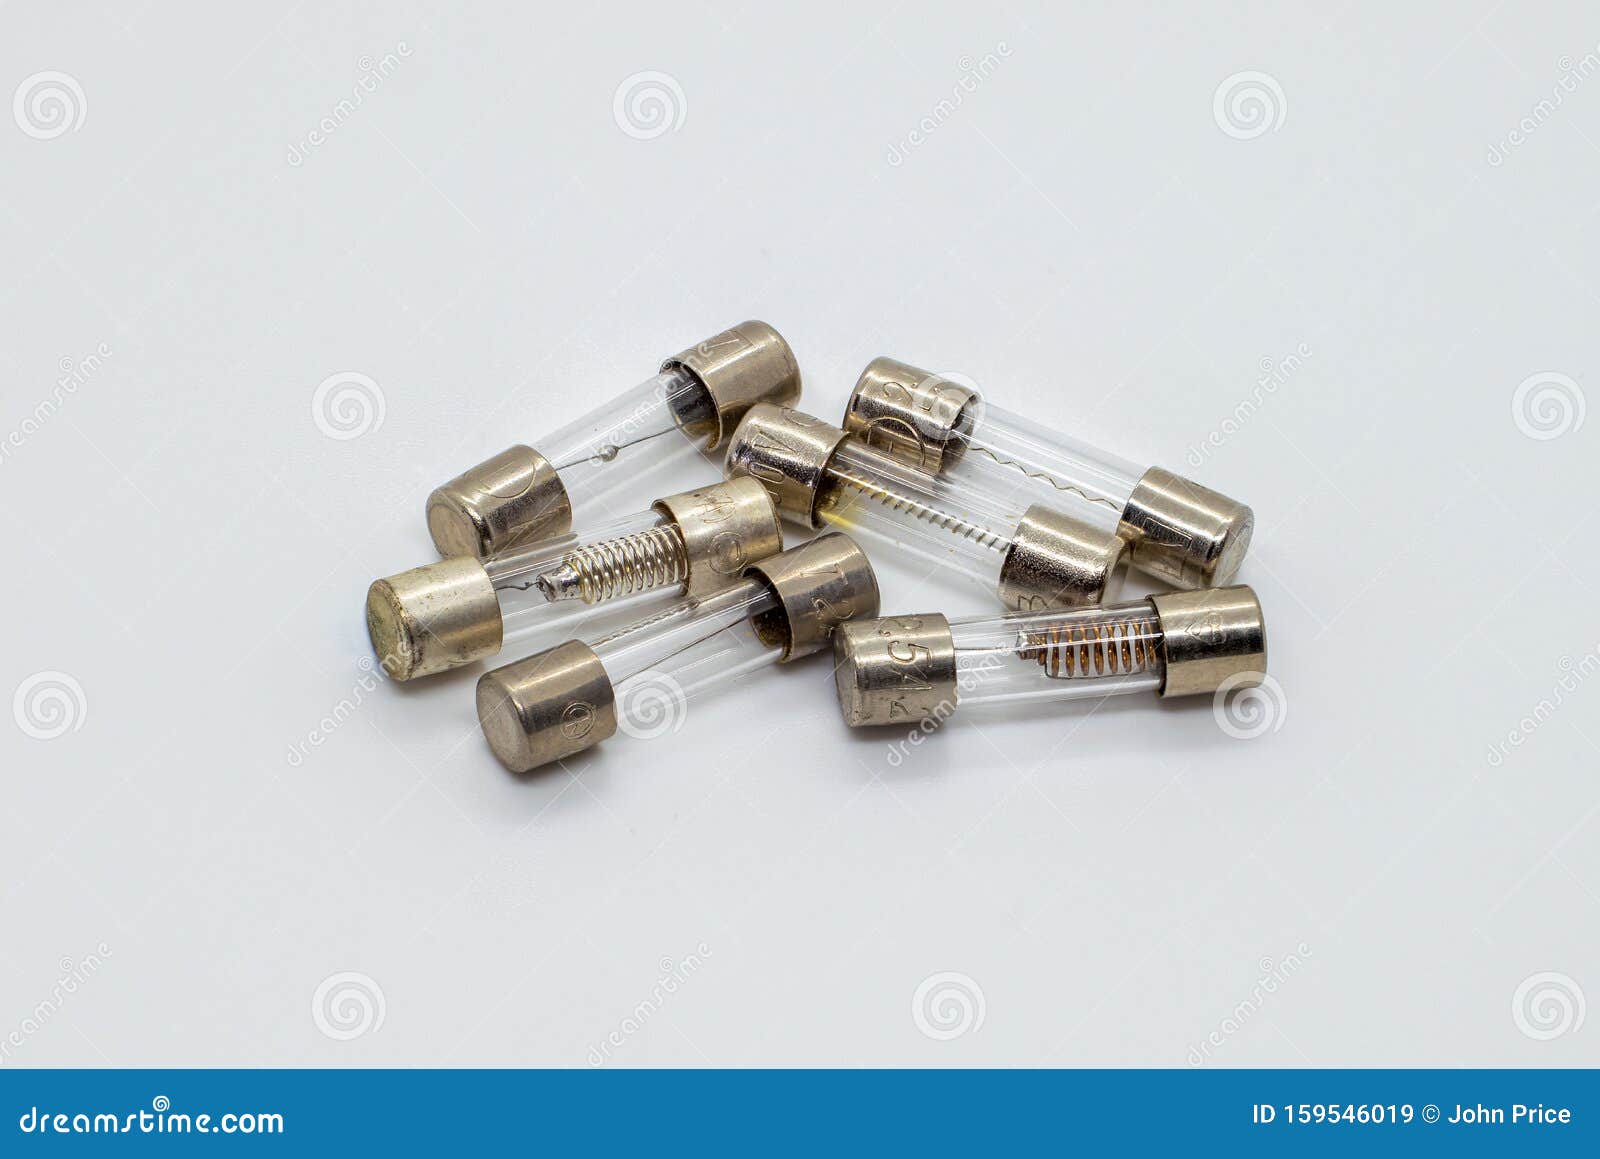 various types of 20mm glass fuses